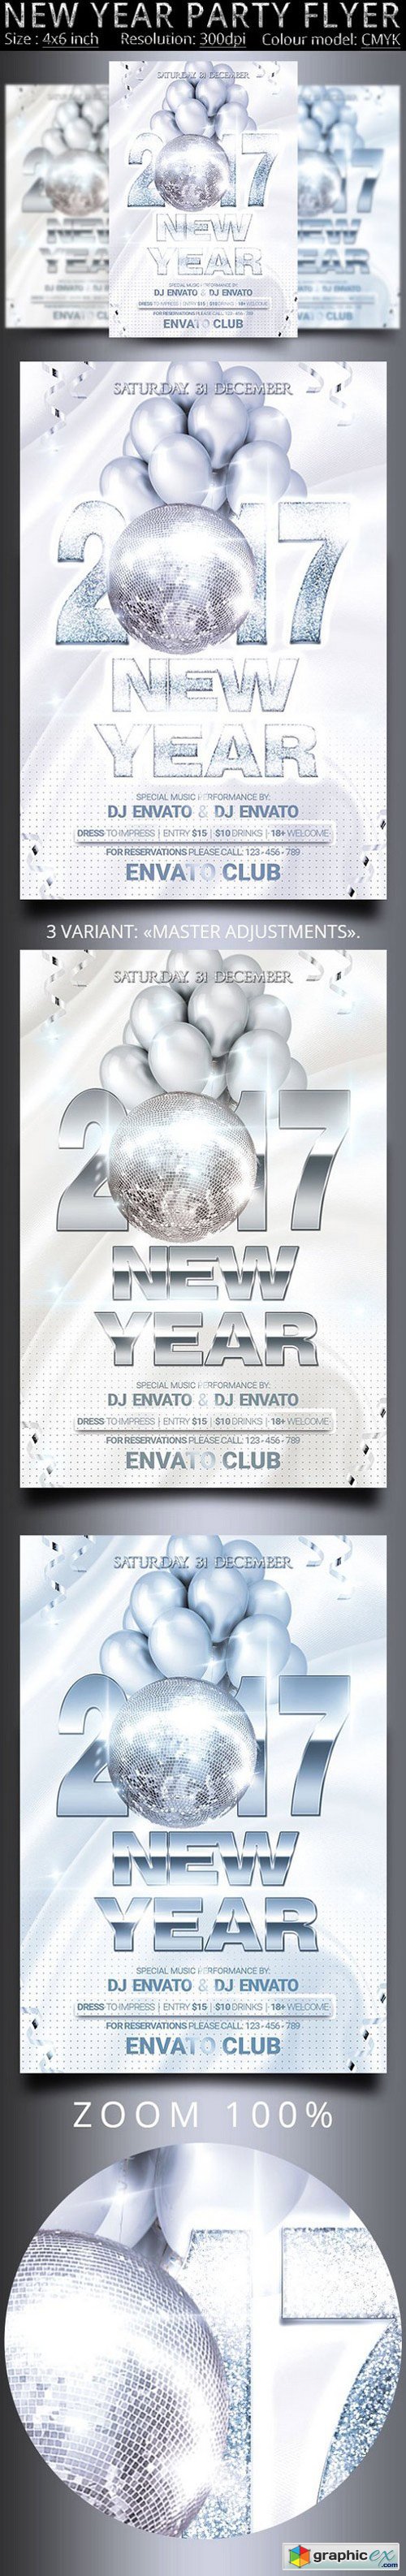 New Year Party Flyer 1036577